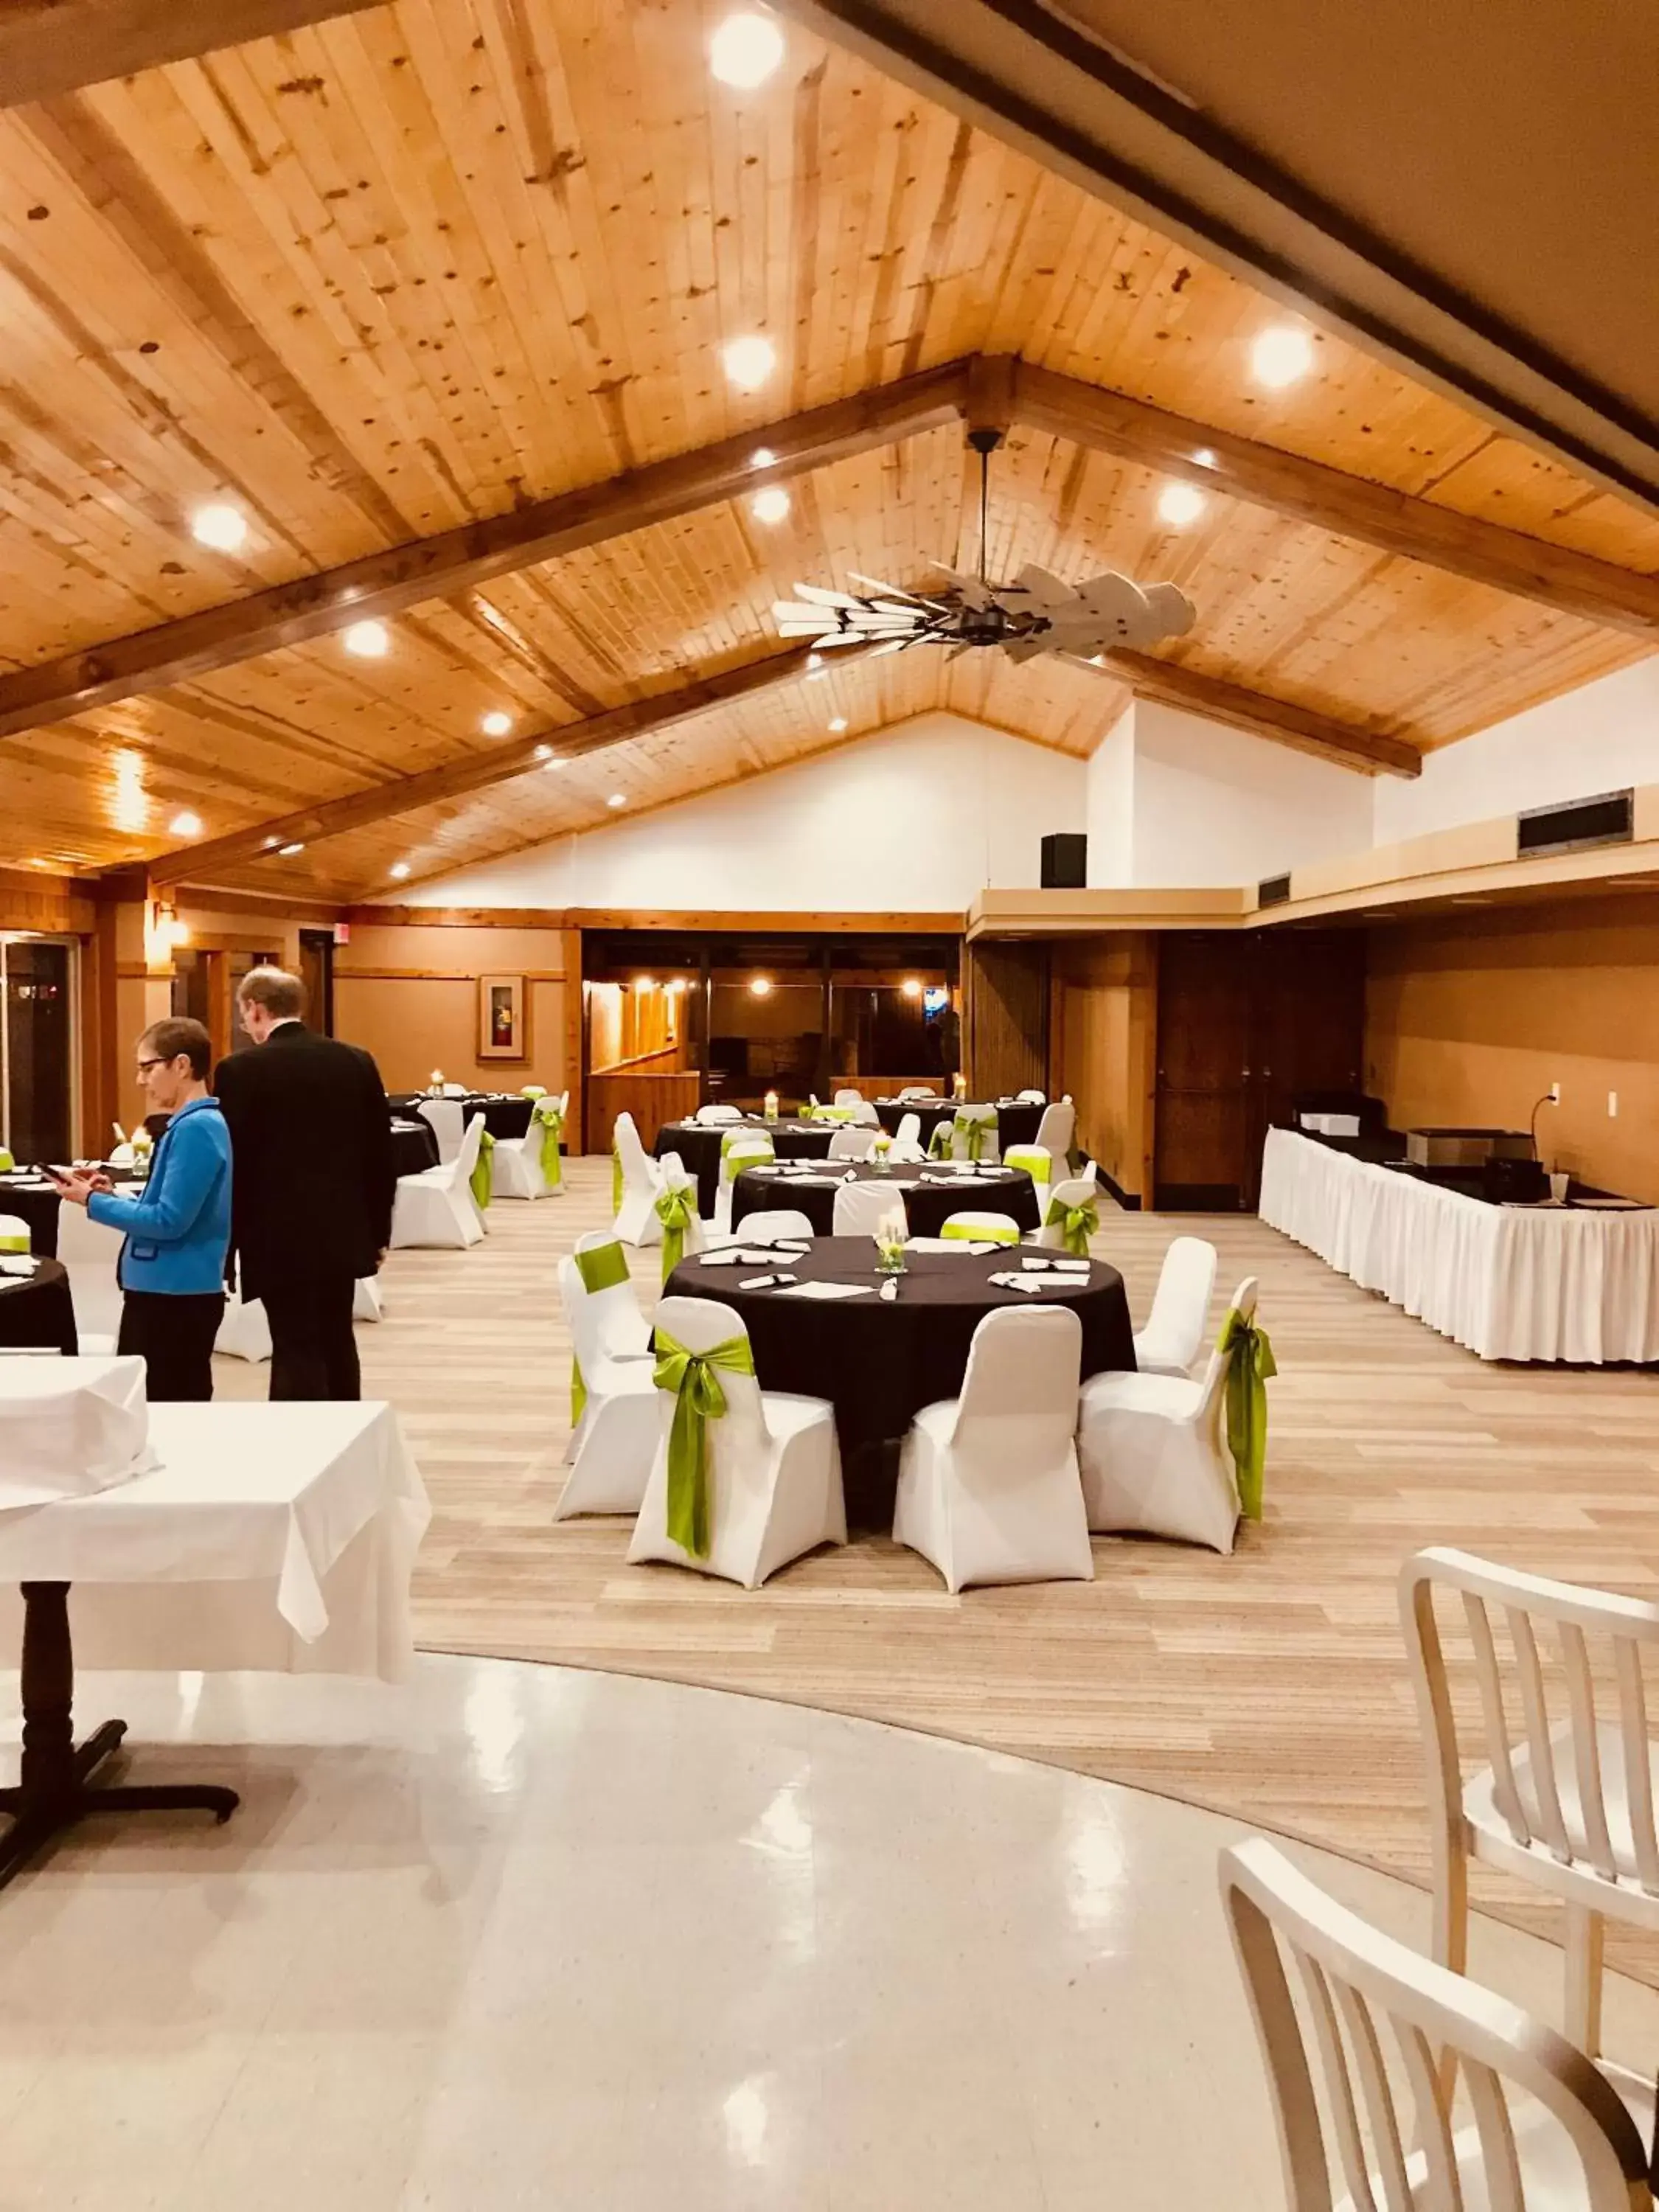 Banquet Facilities in Round Barn Lodge